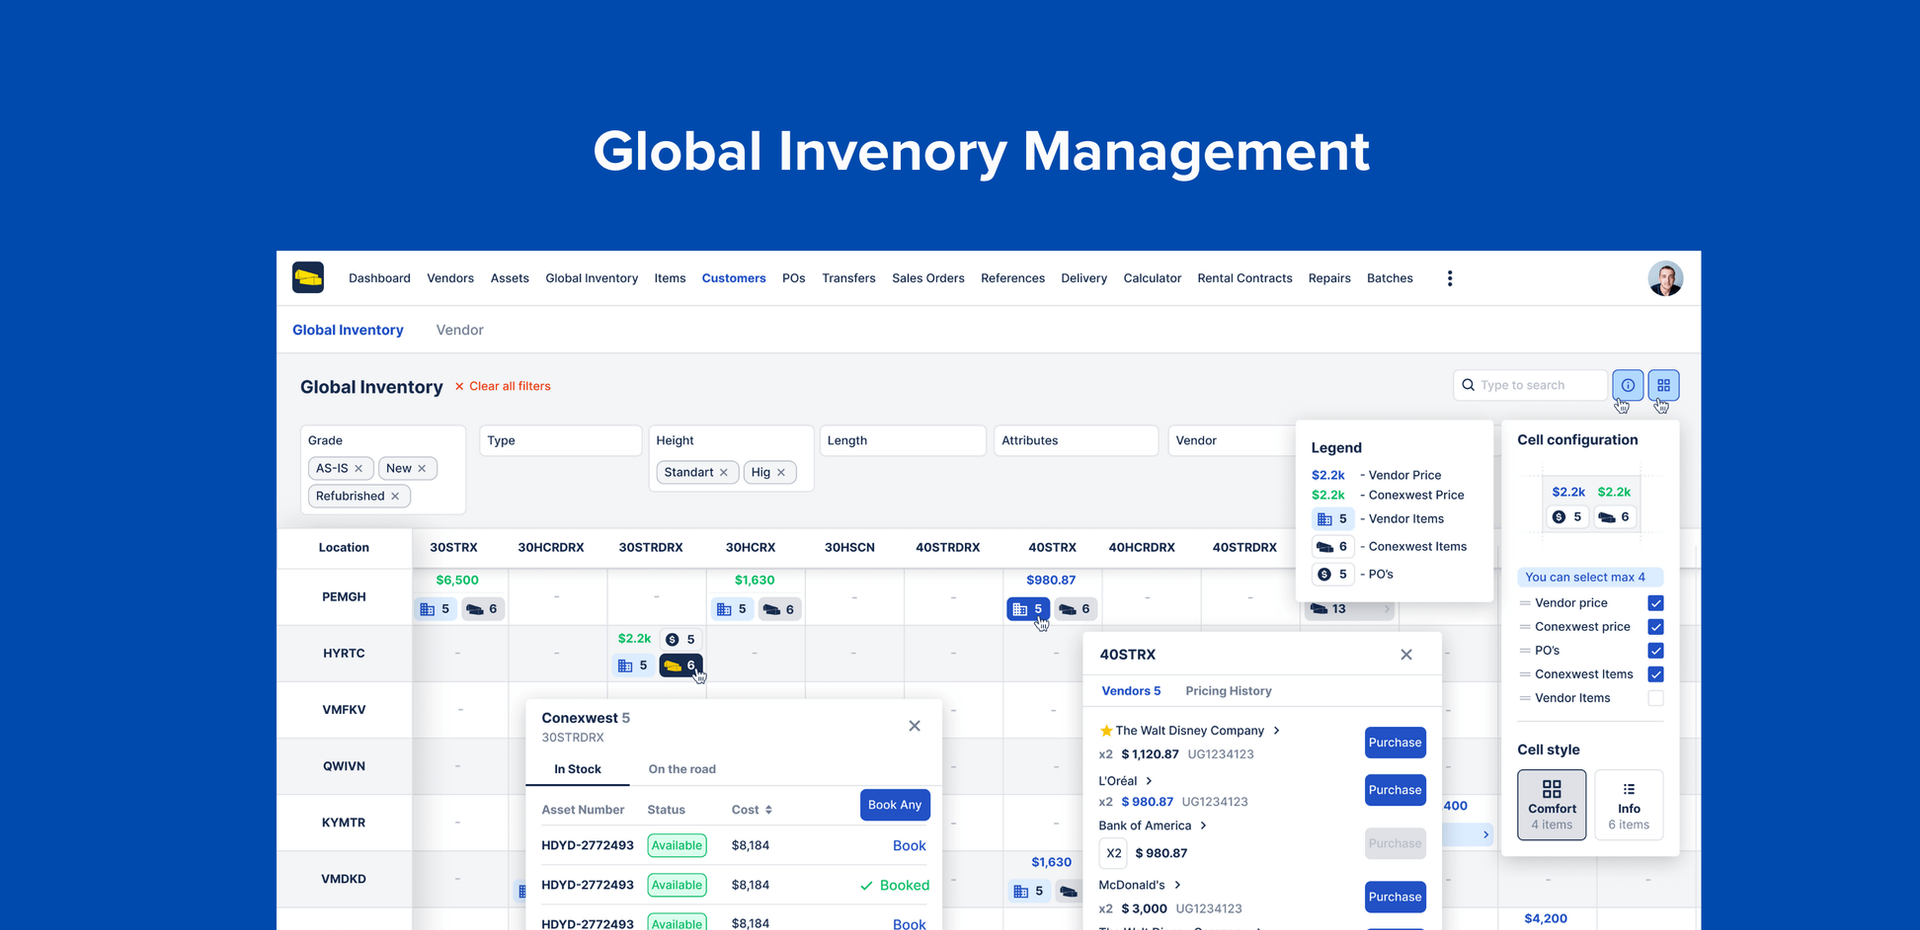 Conexwest ERP software: Global Inventory Management